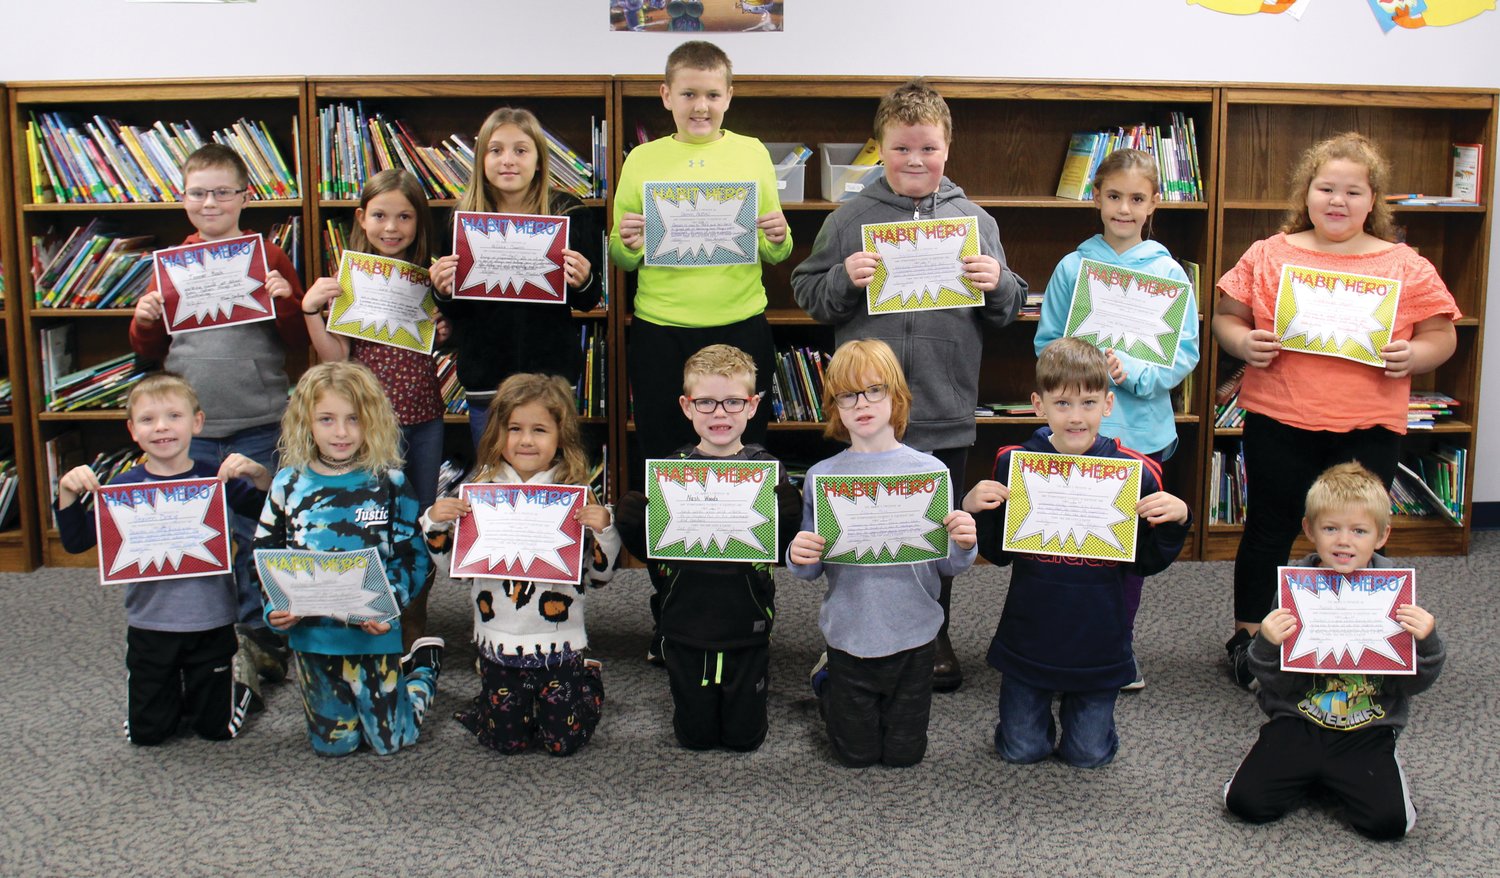 Turkey Run Elementary students received Habit Hero Awards as a part of their Leader in Me program. Habit Hero awards are given to students who set a good example in one of the seven habits. Awards are presented by staff members to students who they believe have excelled in one of the habits. October Habit Hero Award winners are, from left, front row, Steven Doty, Keylee Lemon, Charlotte Rice, Nash Woods, Ozzie Rose, Jameson Bryan and Marshall Harper; and back row, Tanner Back, Lorie Reynolds, Haliana Sowers, Damon Patton, Kaden Flood, Taylor Snell and Oakleigh Wyatt. Not pictured is Brook Hammonds.